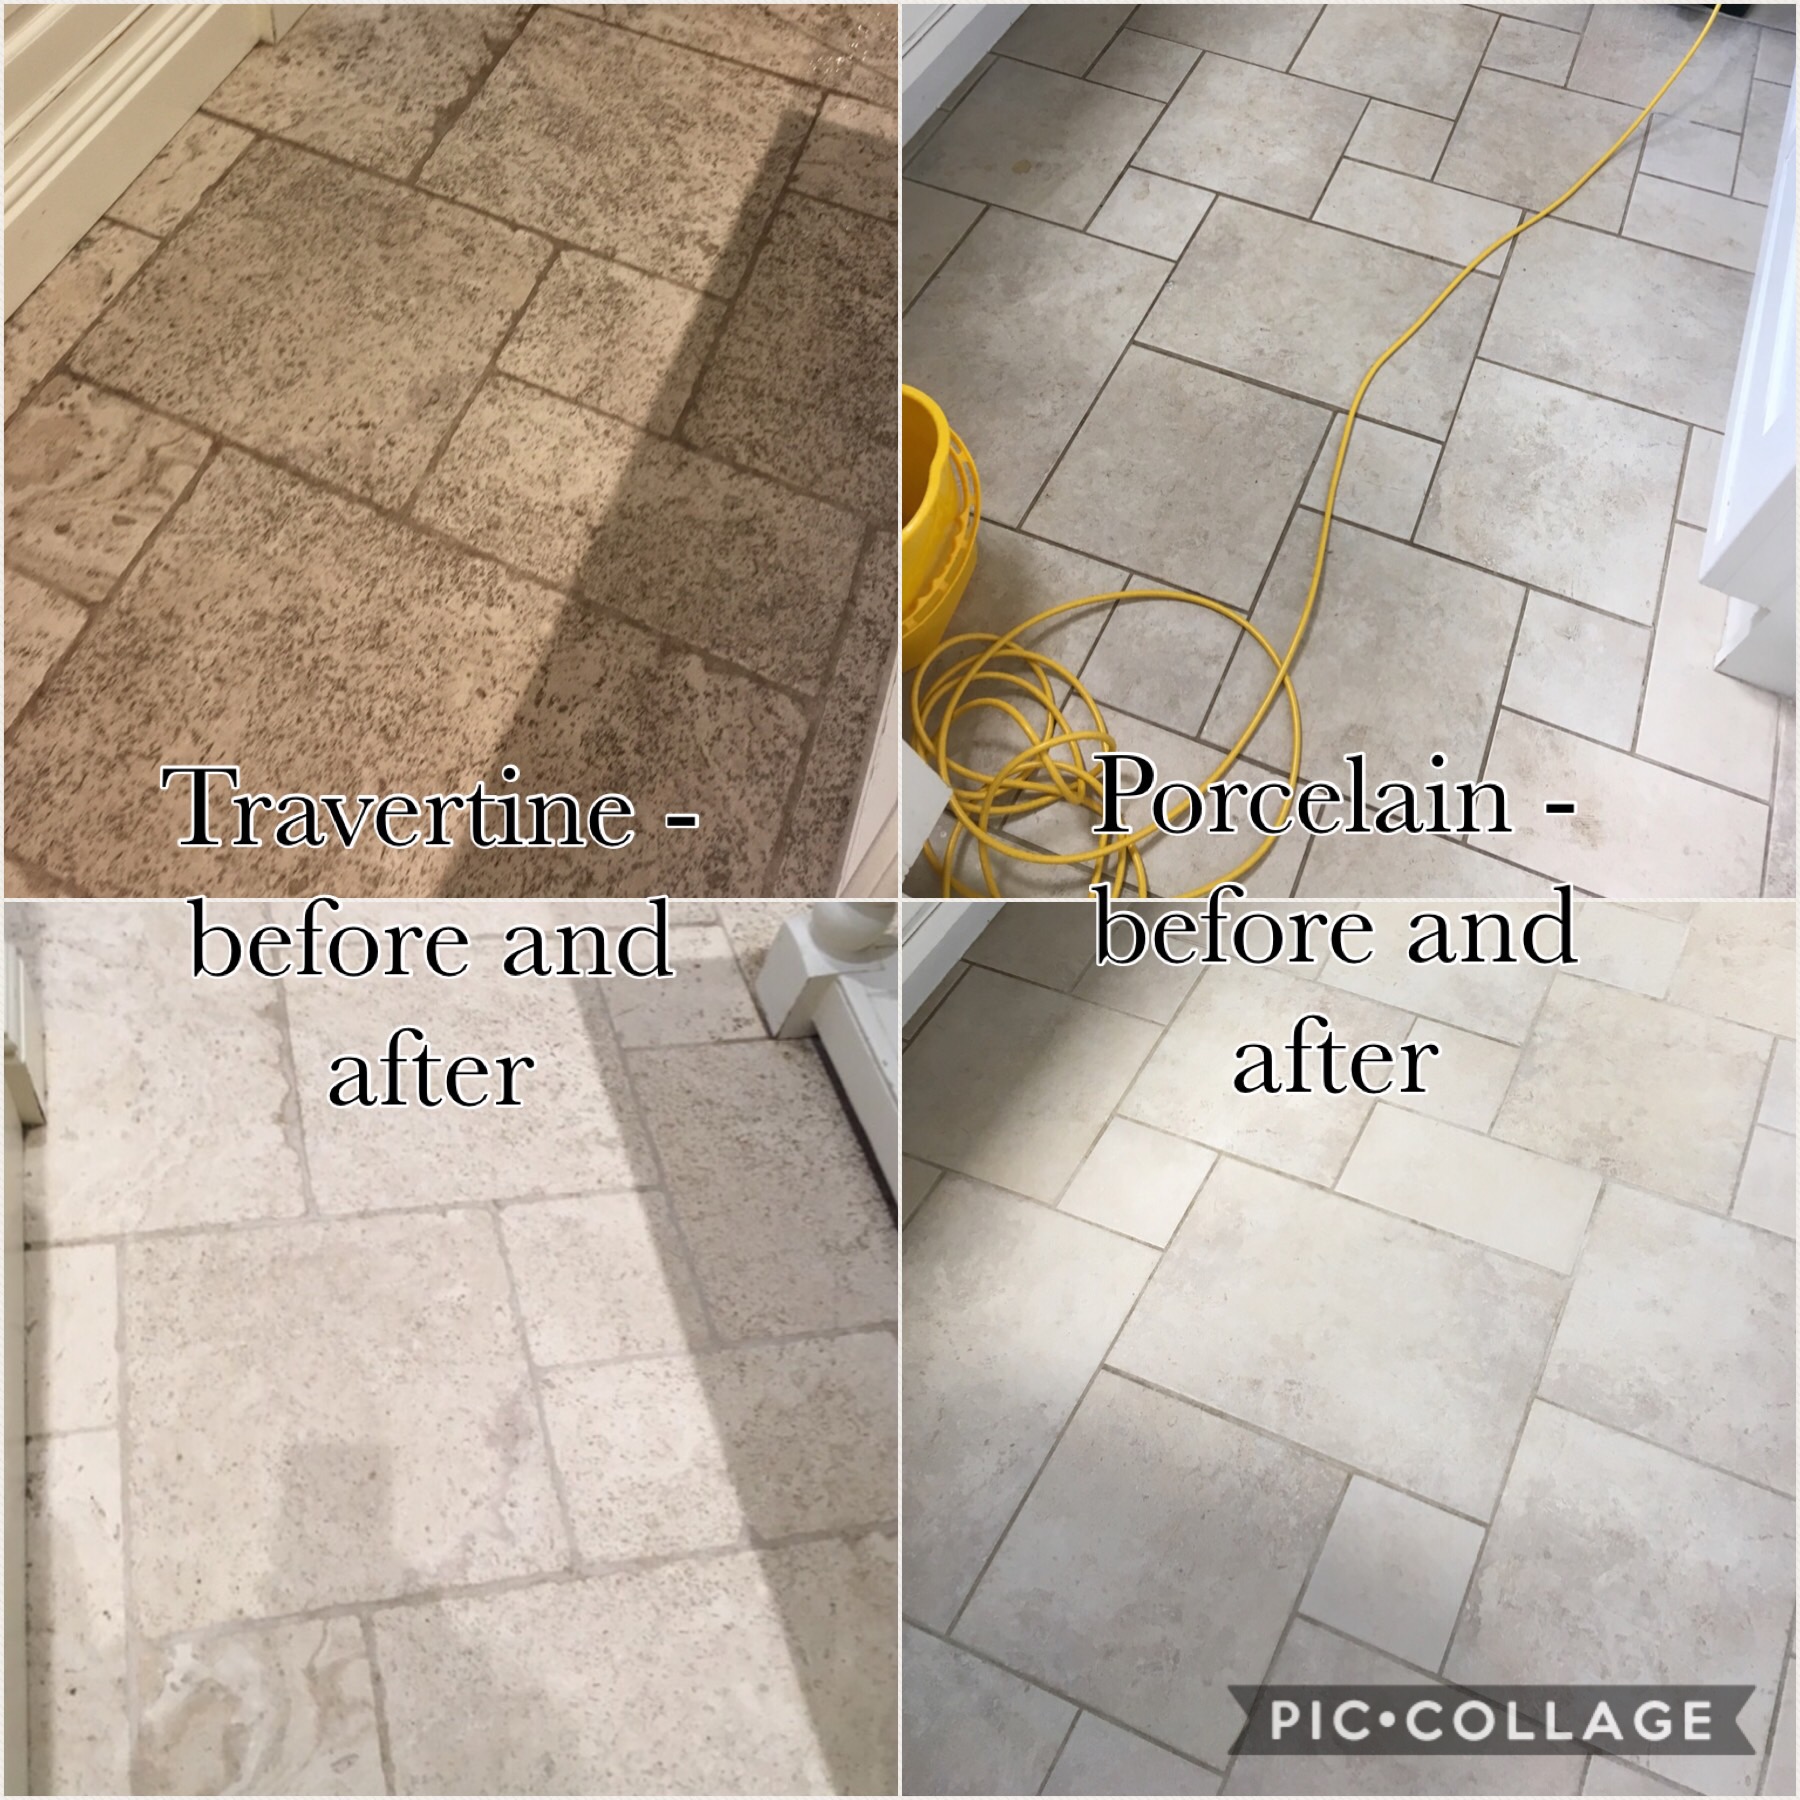 Stone Tiled Floor Cleaning Sparkling Matters